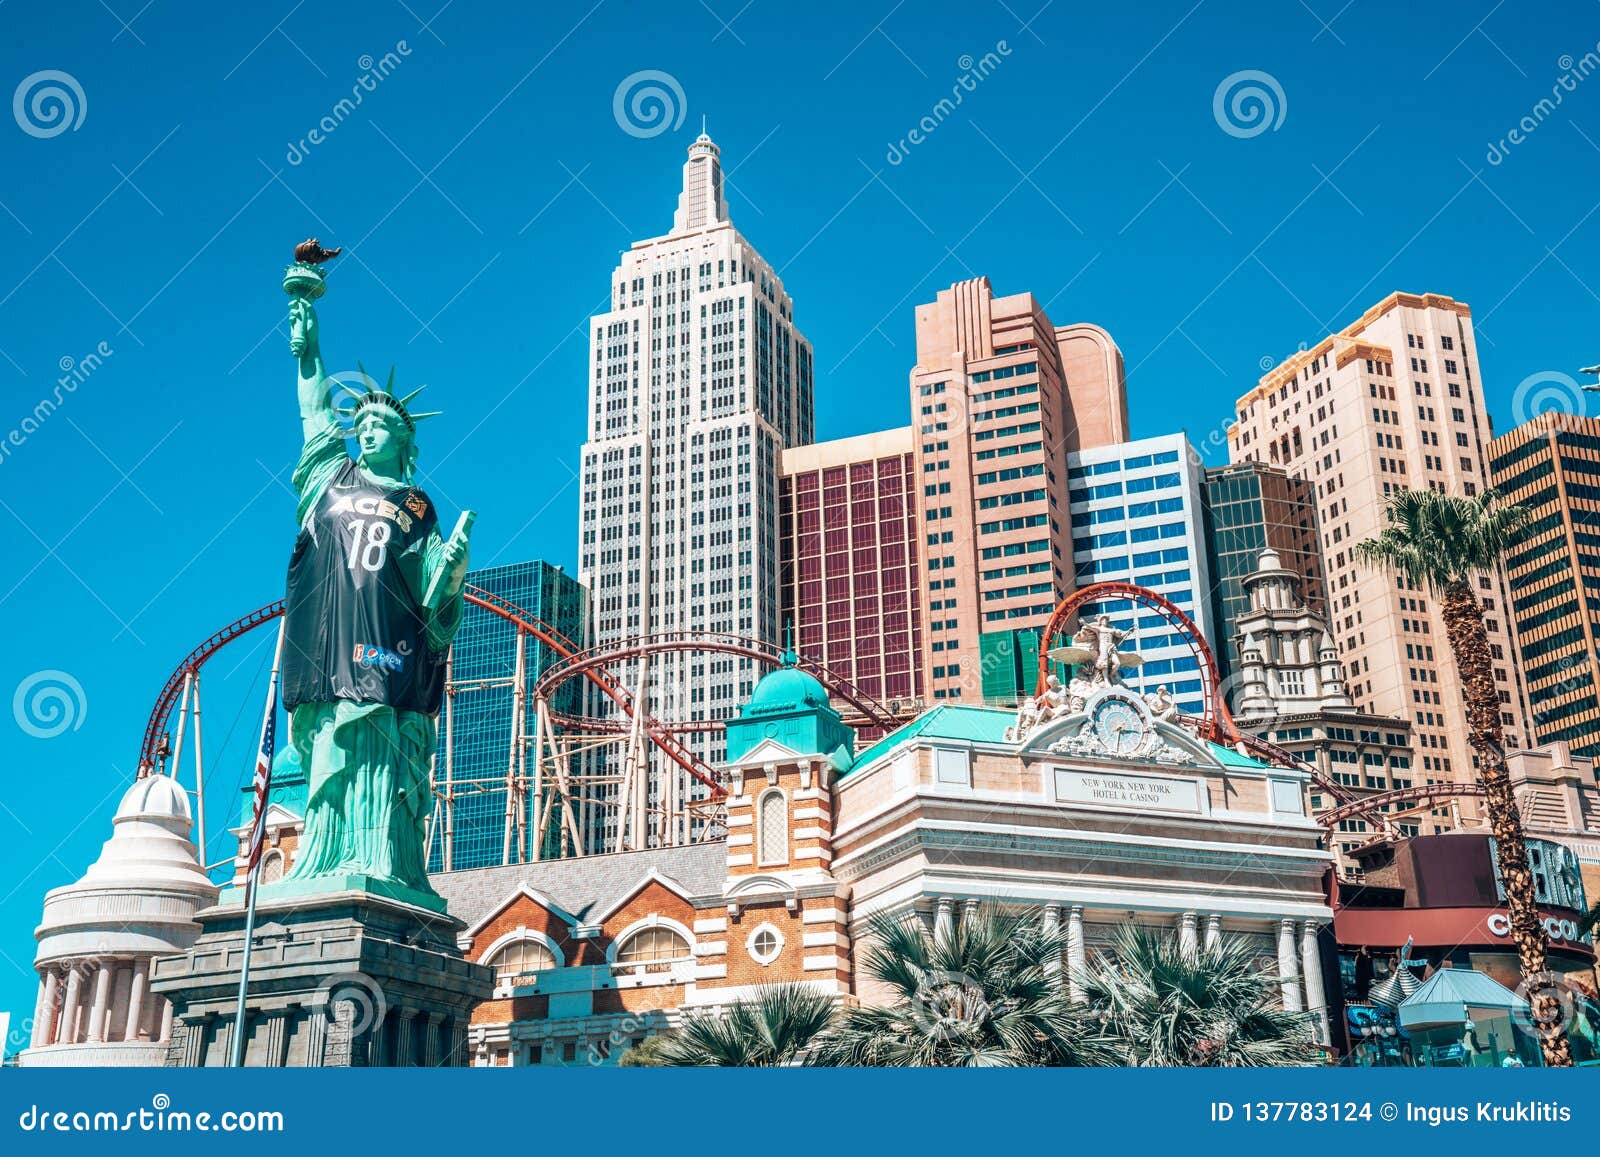 Las Vegas Nevada Statue of Liberty Replica in front of New York New York  Hotel